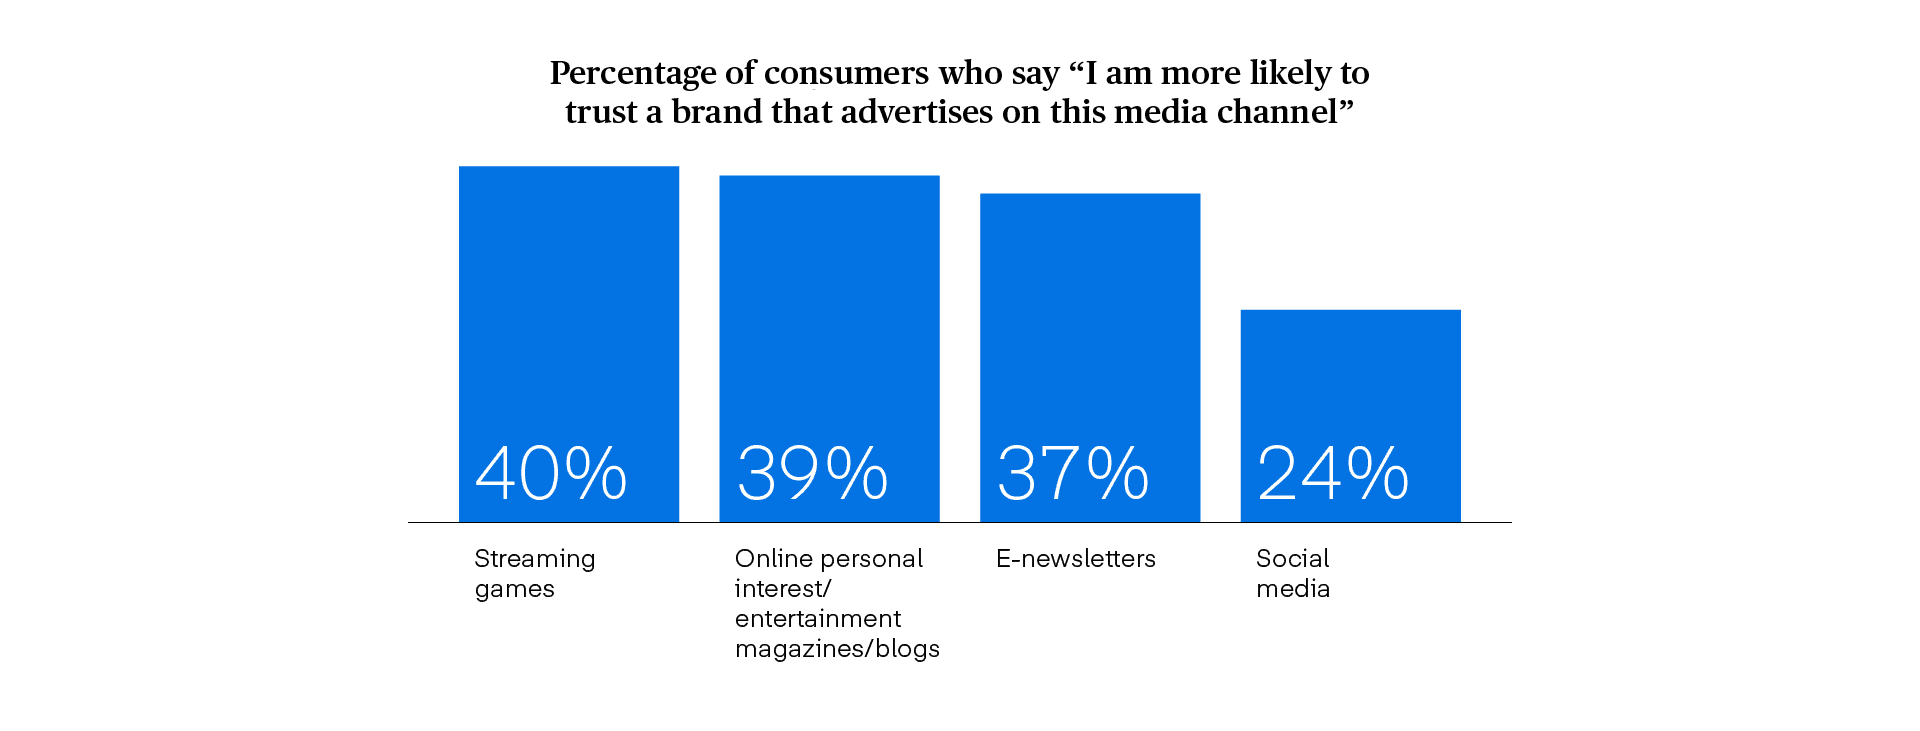 Bar chart displaying data on: Percentage of consumers who say "I am more likely to trust a brand that advertises on this media channel"